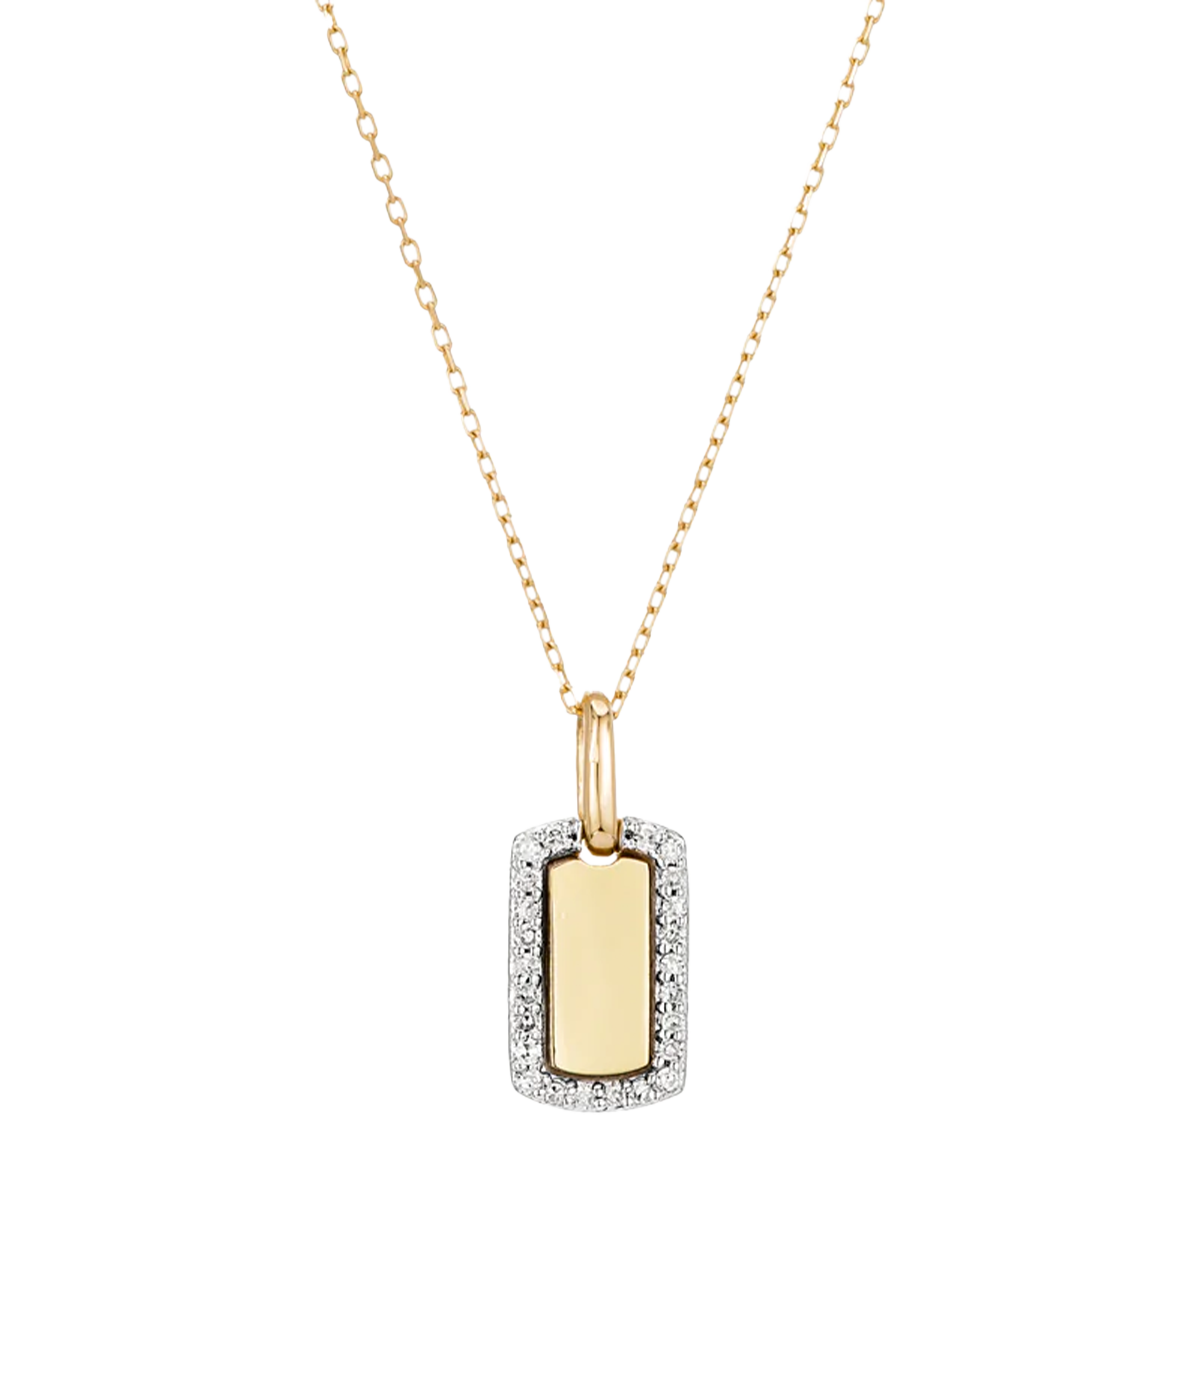 Tiny Pave Dog Tag Necklace in 14K Yellow Gold